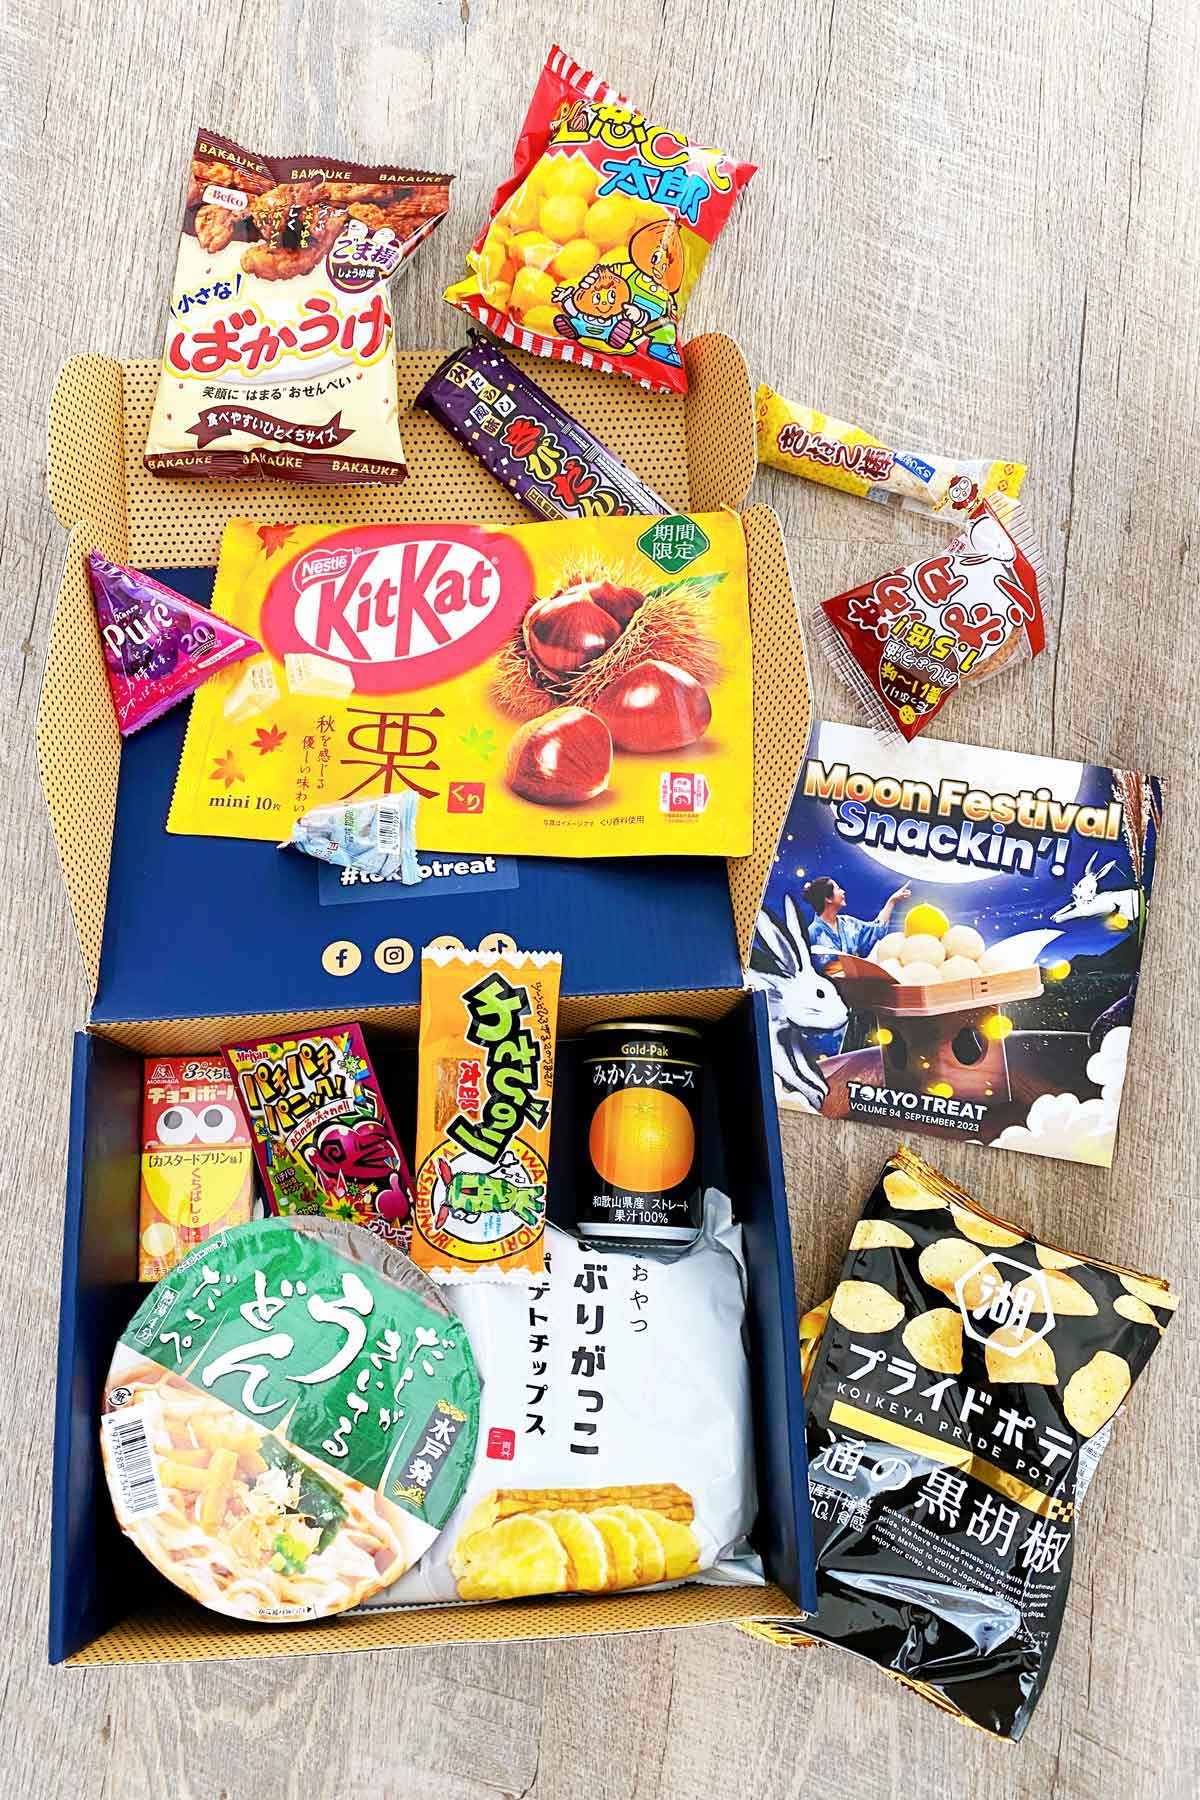 Tokyo treat box contents laid out